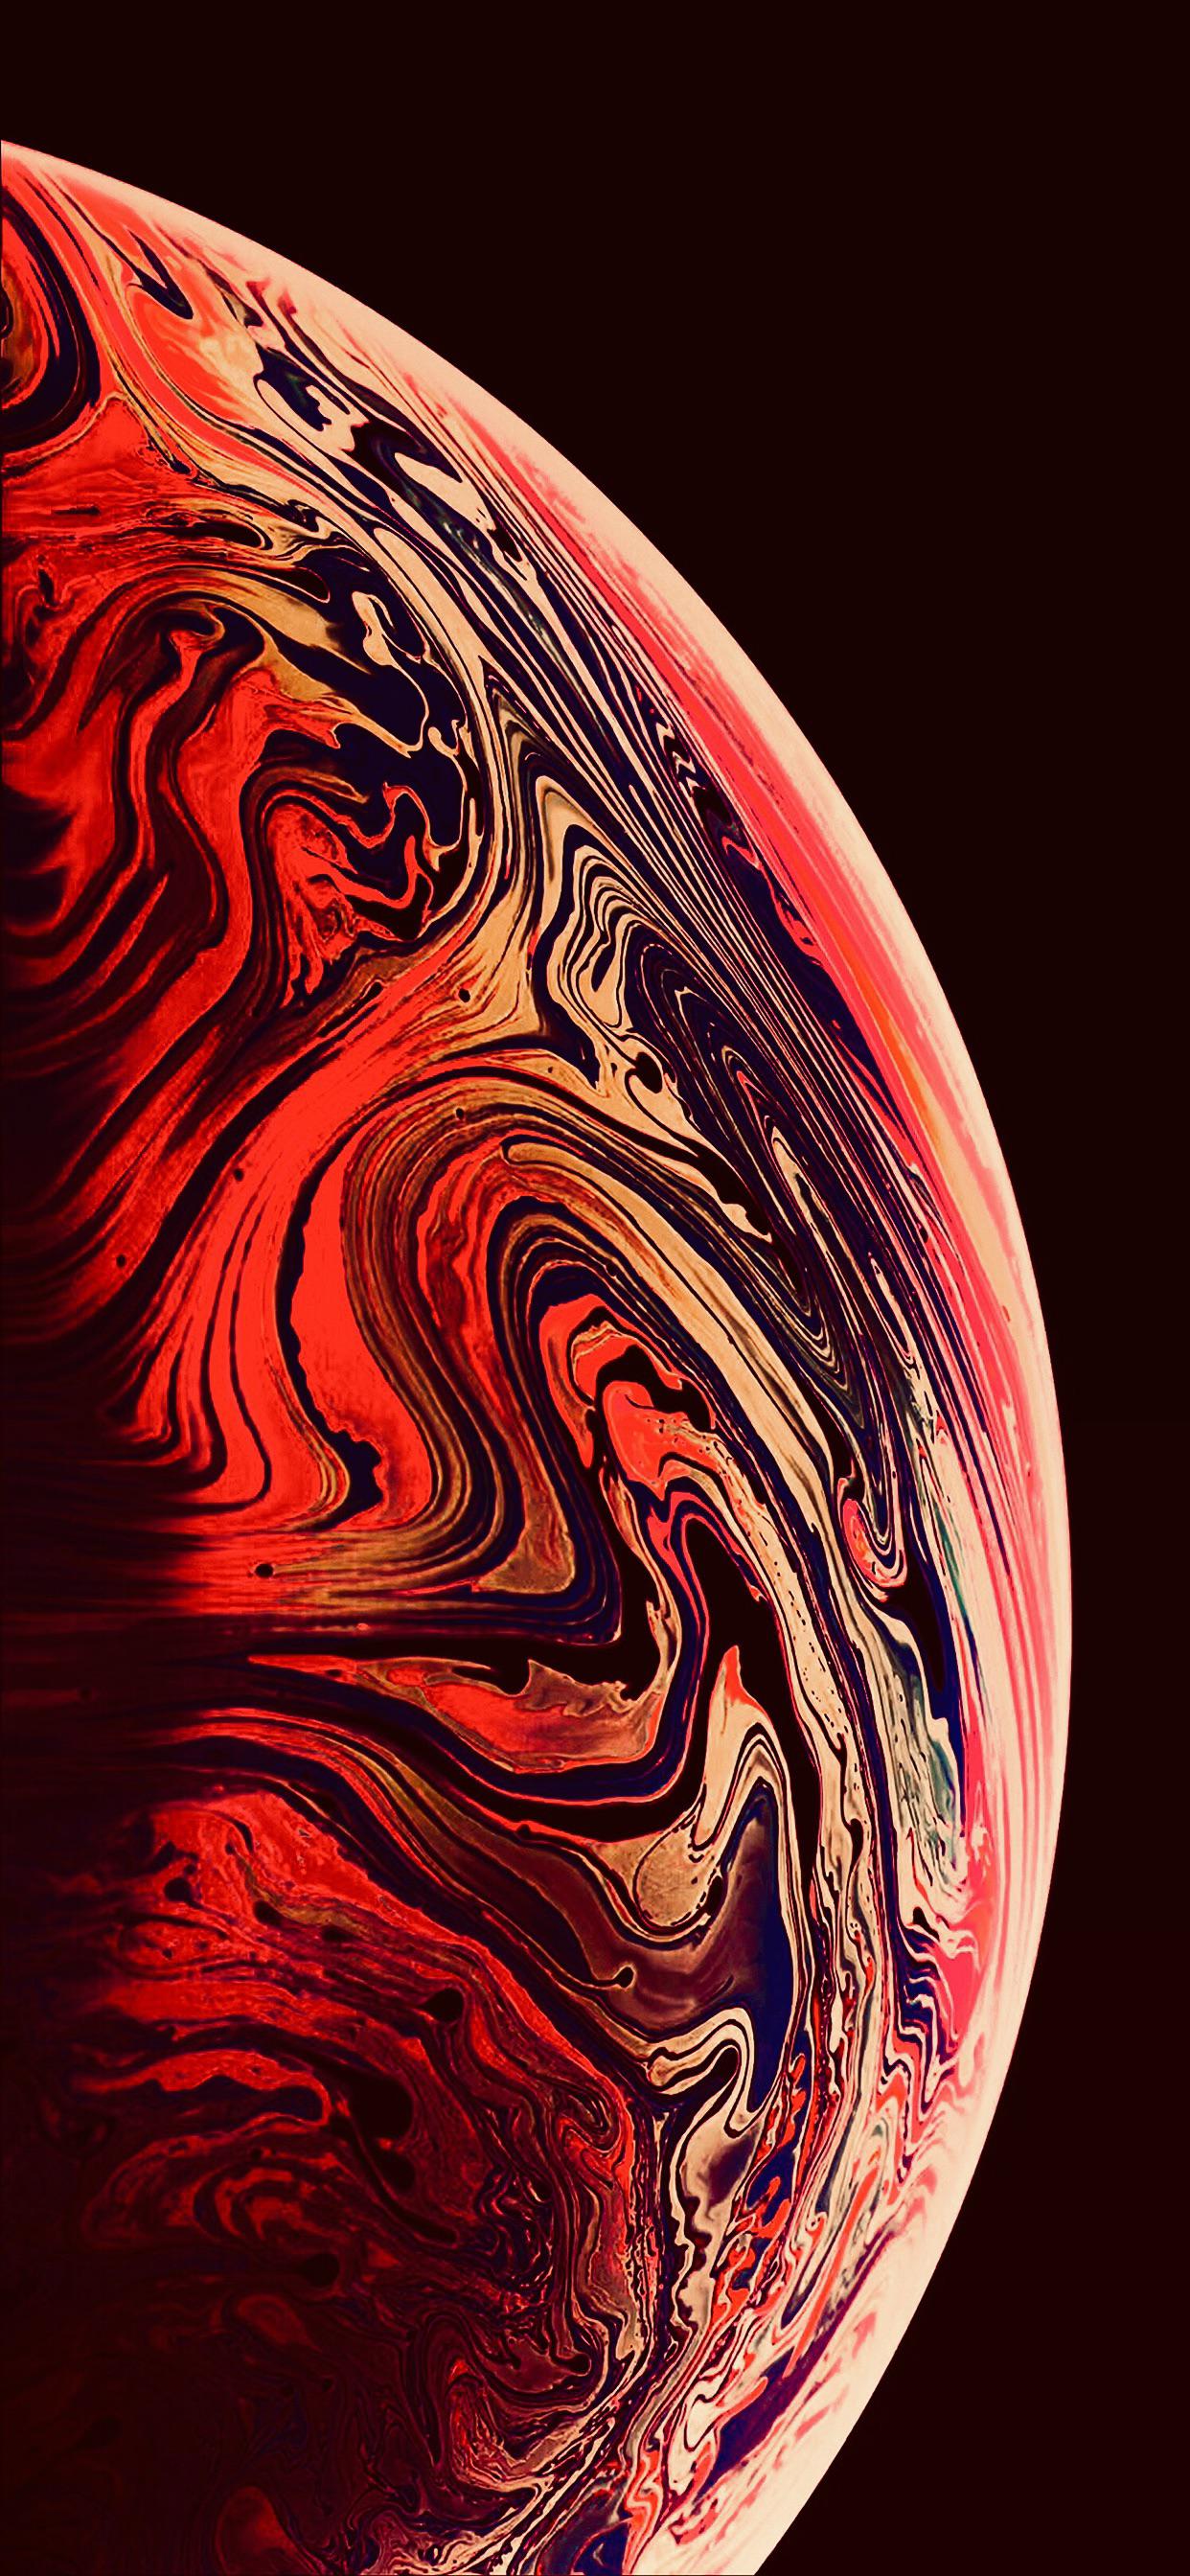 50+ Best iPhone X Wallpapers & Backgrounds